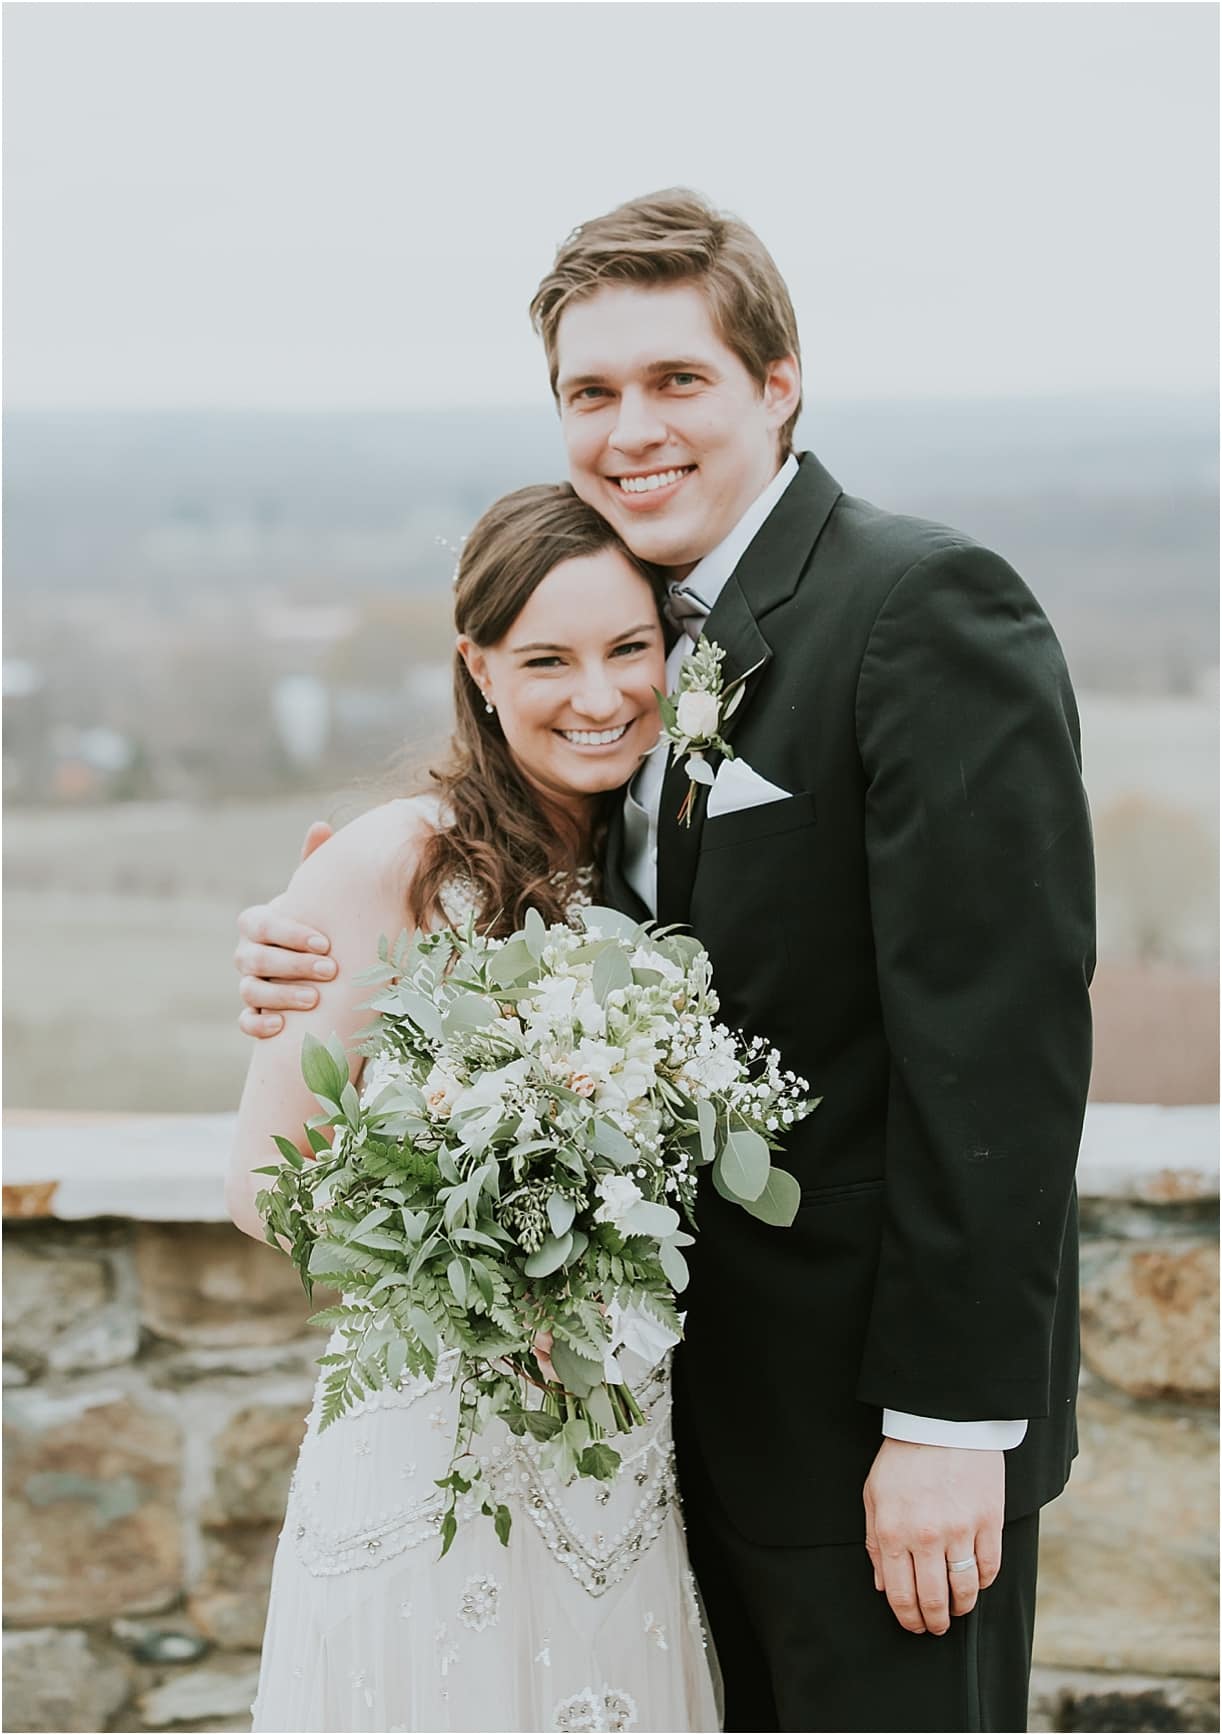 Lovely Virginia Vineyard Wedding as seen on Hill City Bride Blog by Vness Photography - newlyweds